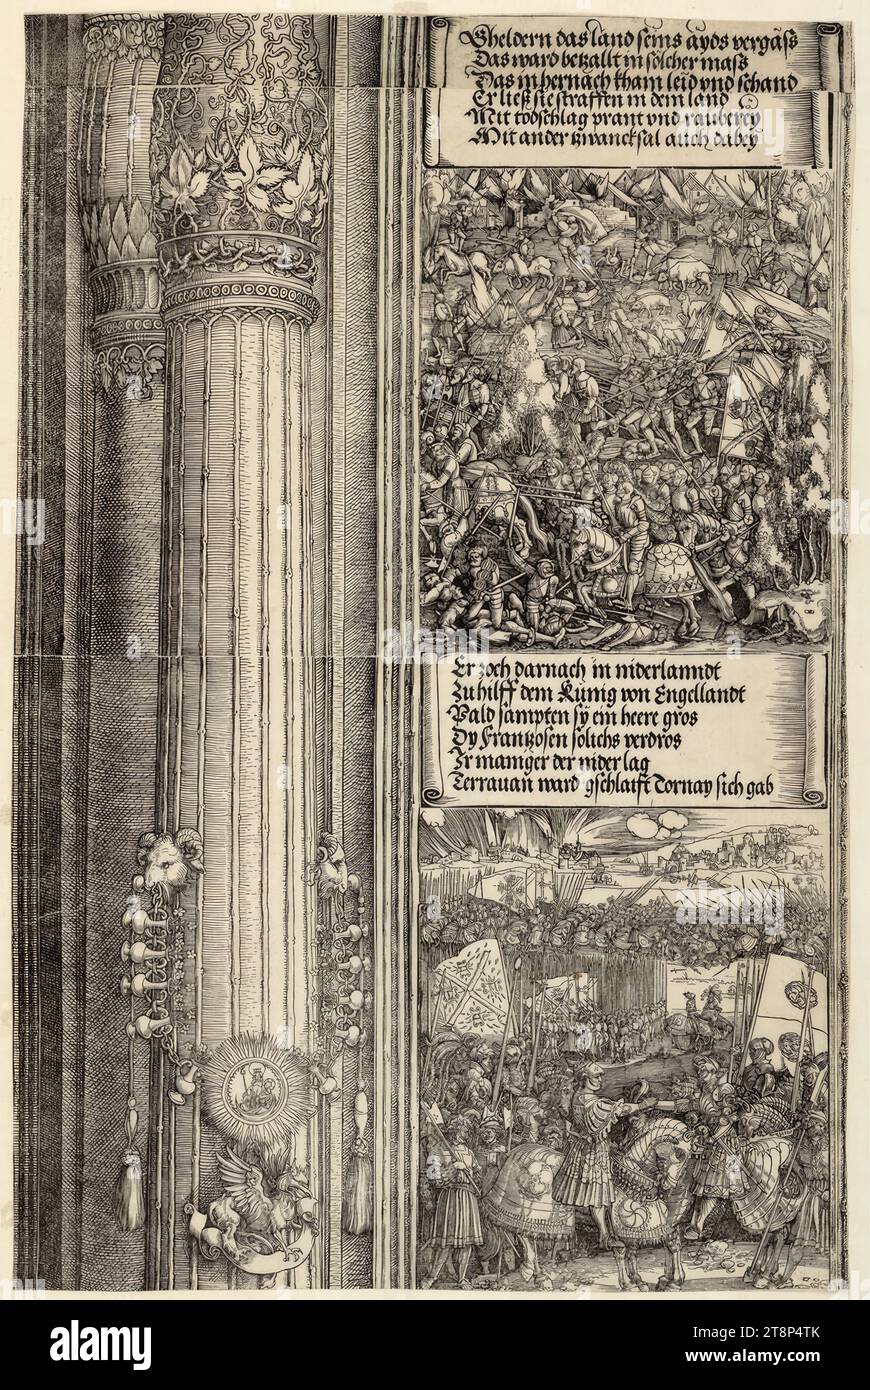 Pair of columns with the Aragonese order of the can, campaign in Geldern 1505, campaign in Flanders and alliance with Henry VIII 1513 (The Arch of Honor of Emperor Maximilian I, historical representations, B', C' 2.7, 10), The Arch of Honor of Emperor Maximilian I, Albrecht Dürer ( Nuremberg 1471 - 1528 Nuremberg), Hans Springinklee (Nuremberg 1490/95 - around 1540 Nuremberg), 1515, print, woodcut Stock Photo